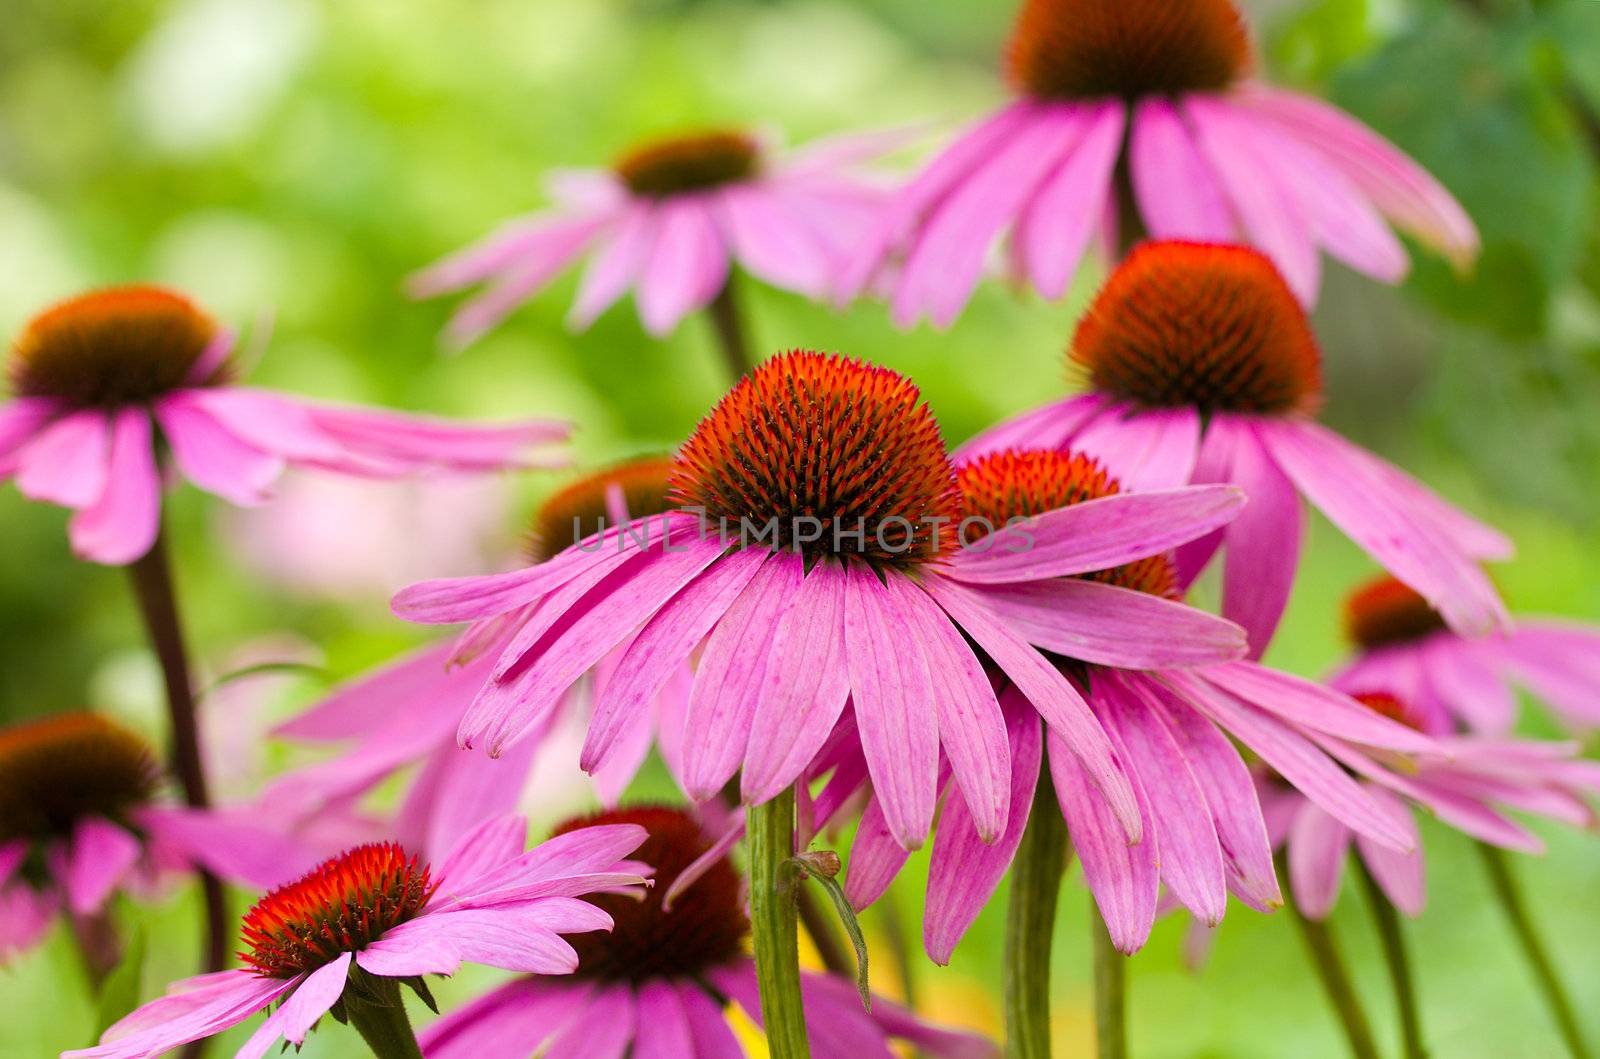 echinacea flowers against green background